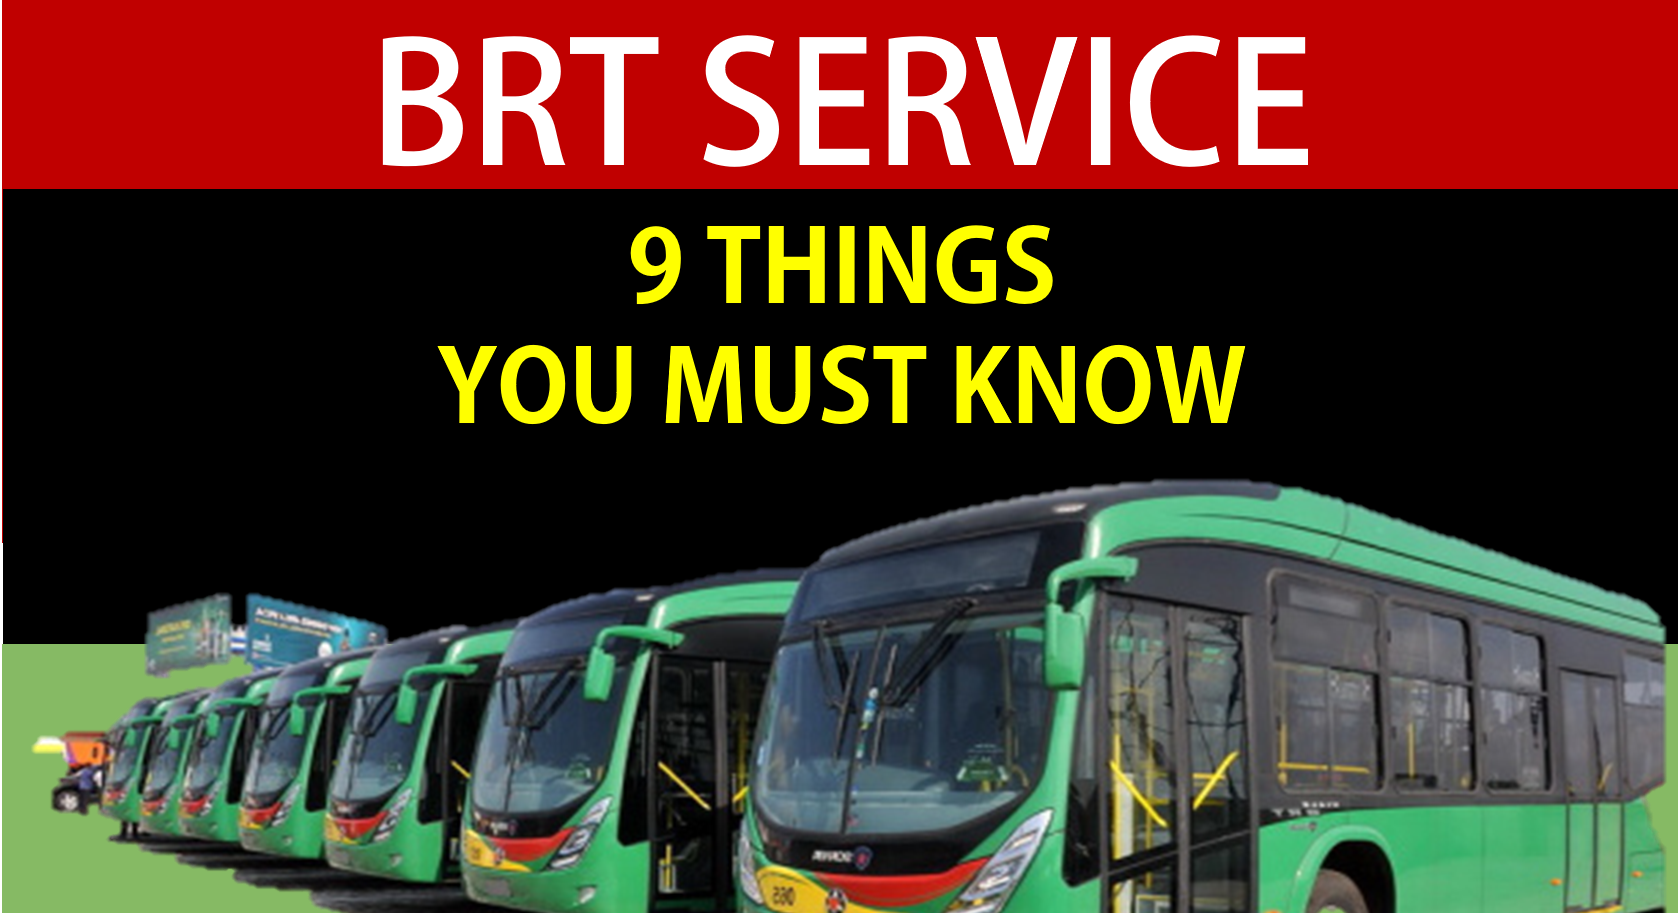 9 things you need to know about â€˜BRTâ€™ service [Infographic]